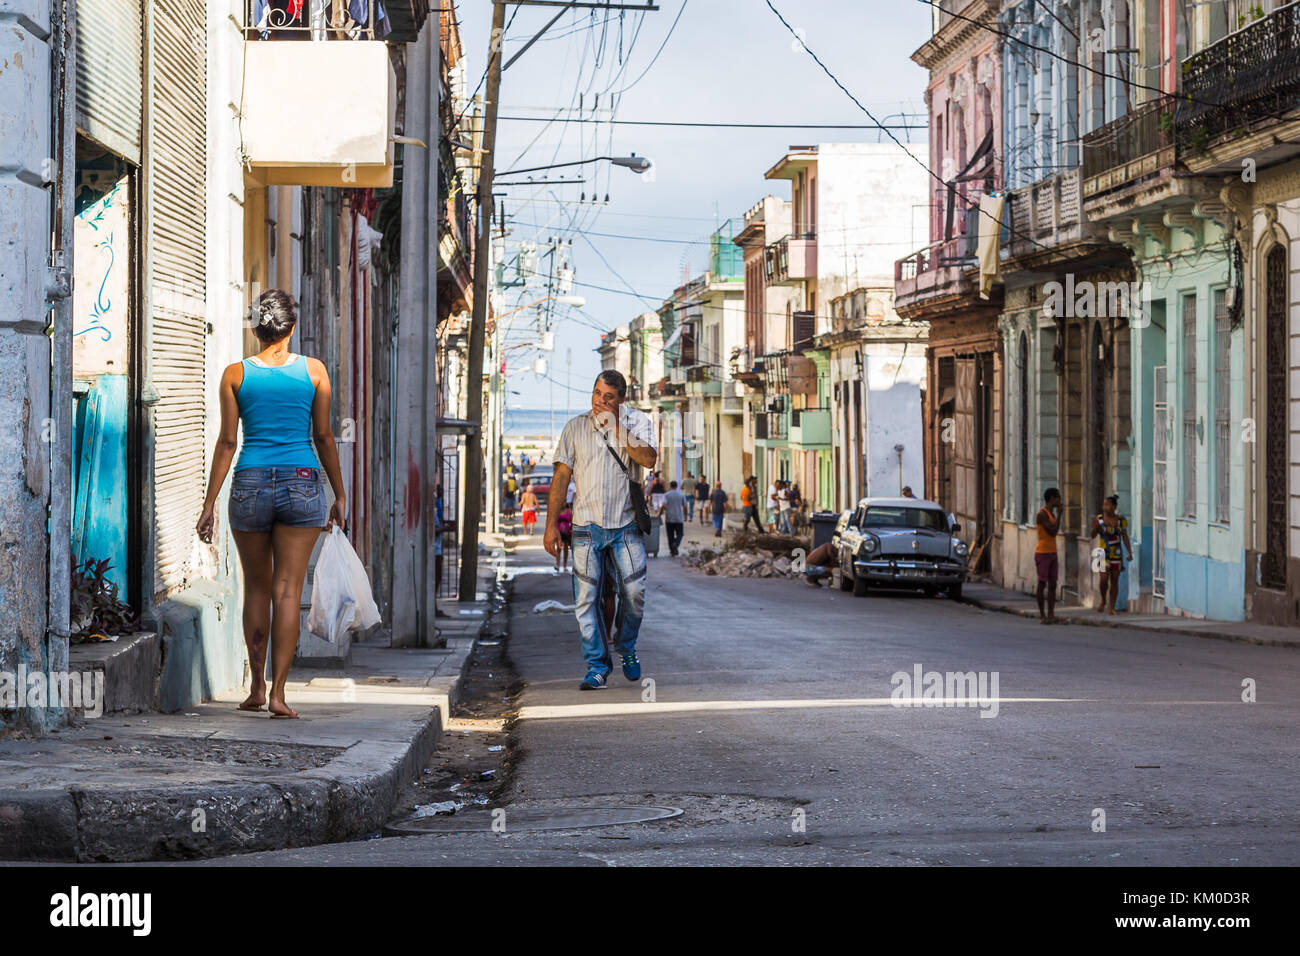 Local people of different ages and wearing varying colours of clothing go about their lives in Centro Havana during November 2015.  The Straits of Flo Stock Photo